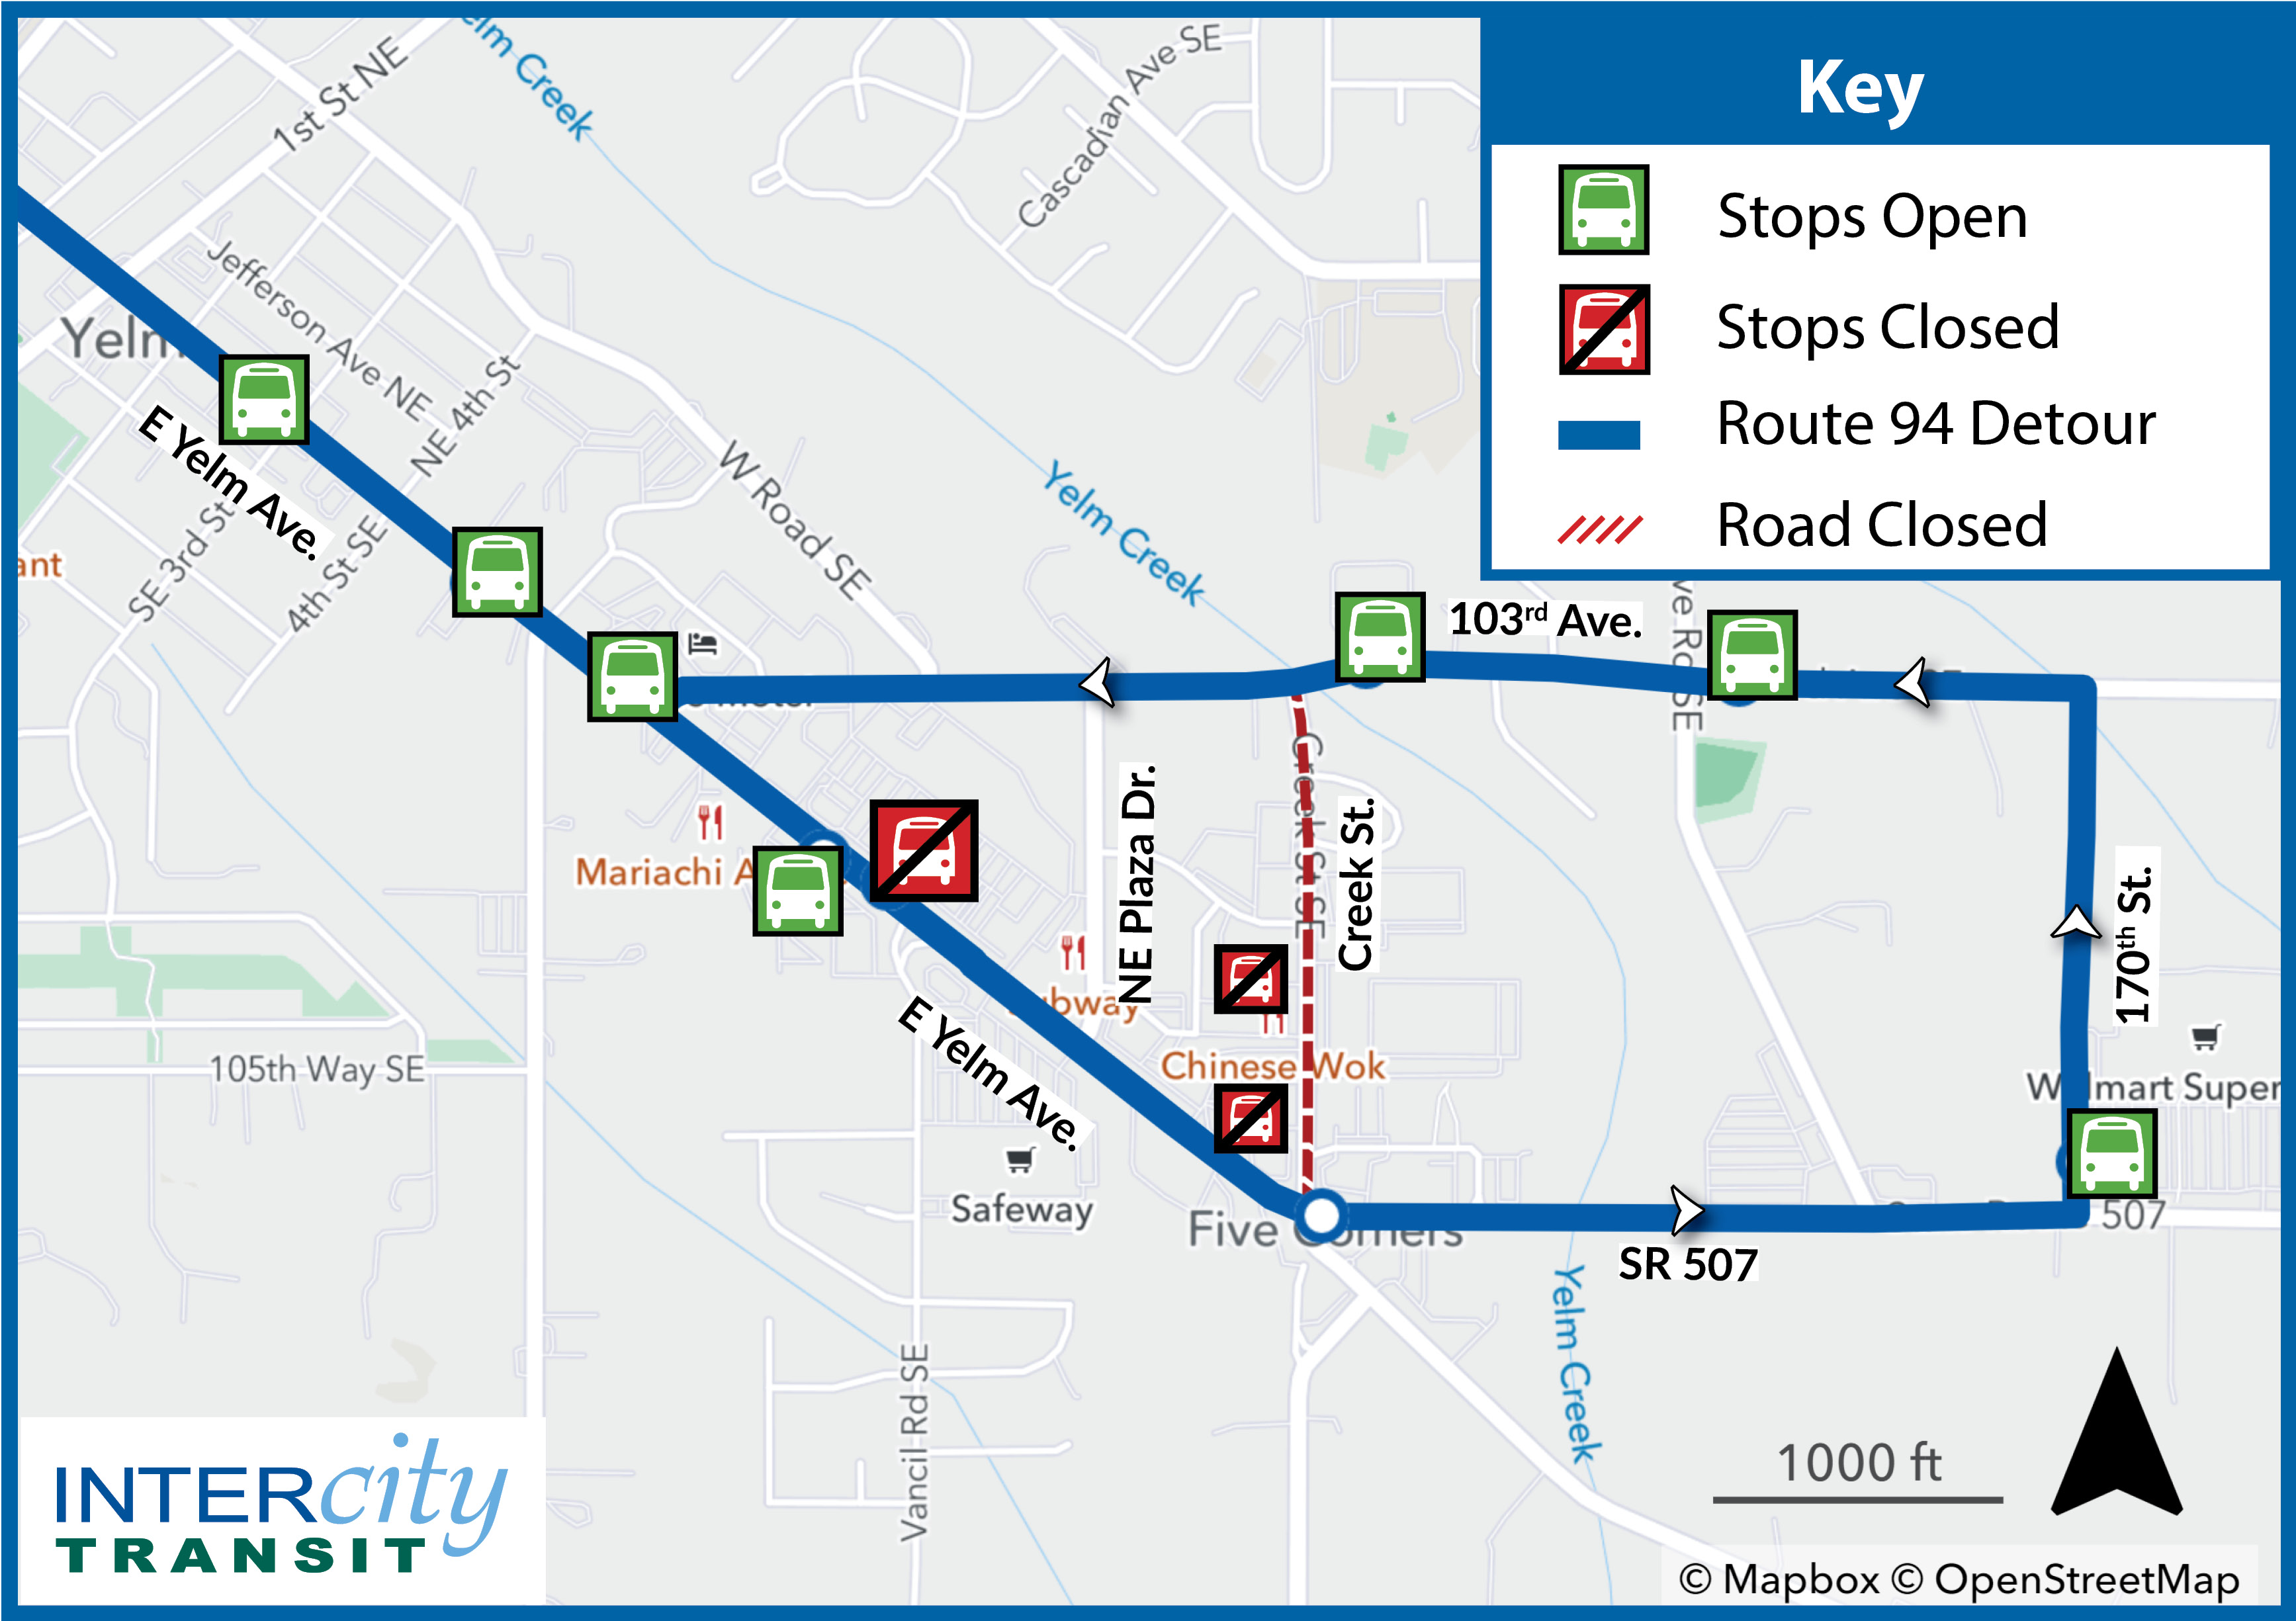 Route 94 will be on detour July 16 due to the SeattletoPortland (STP